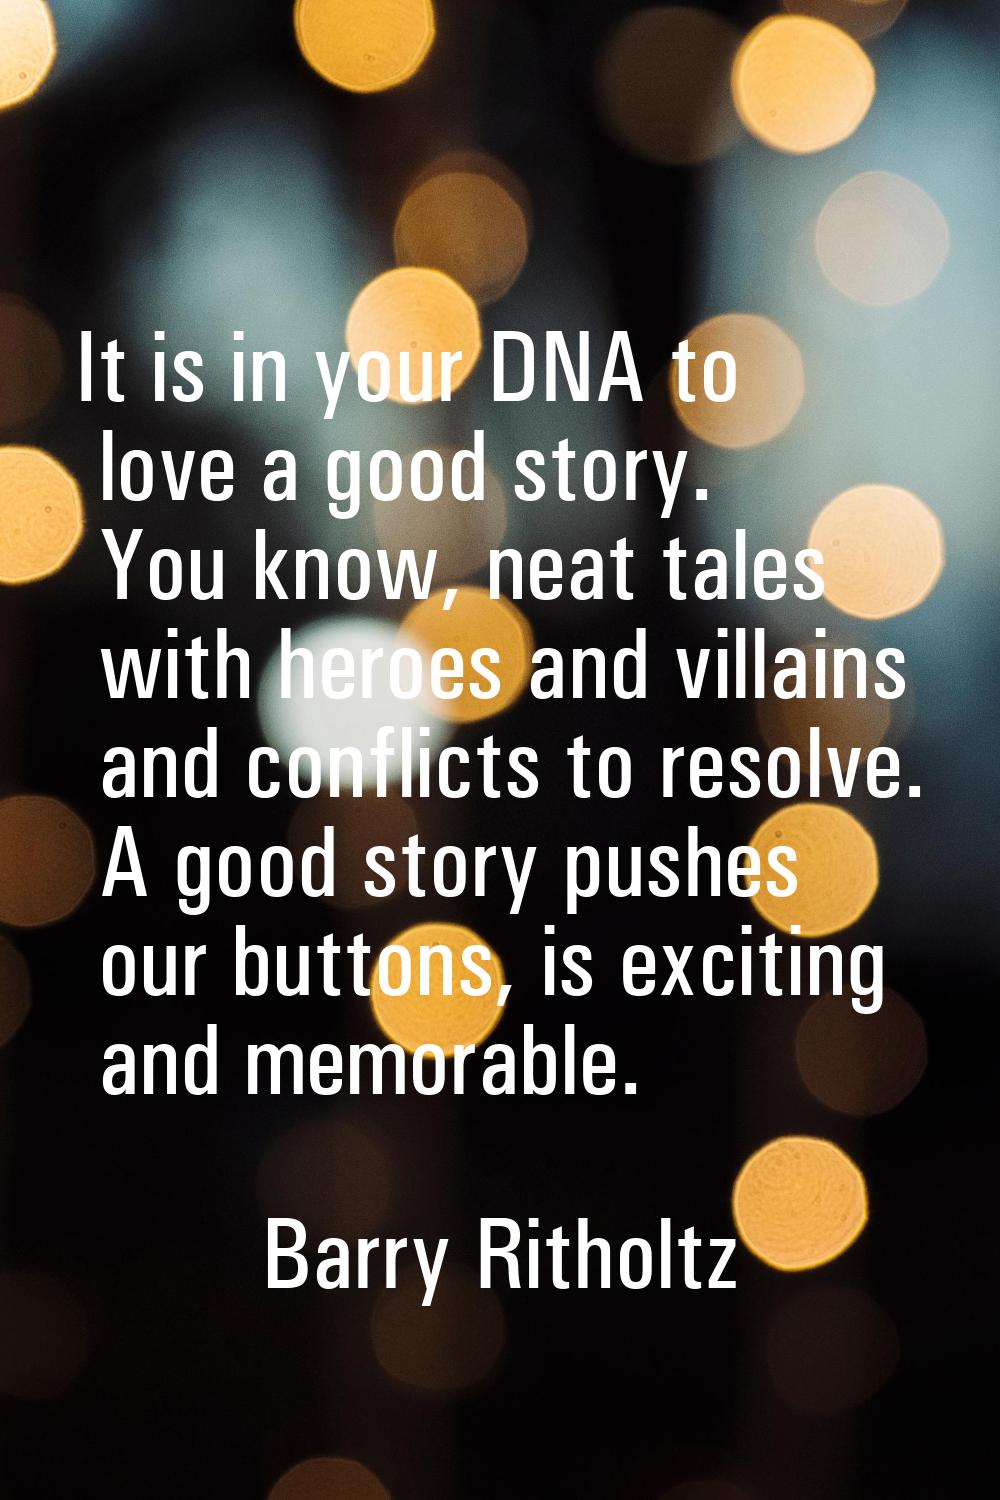 It is in your DNA to love a good story. You know, neat tales with heroes and villains and conflicts